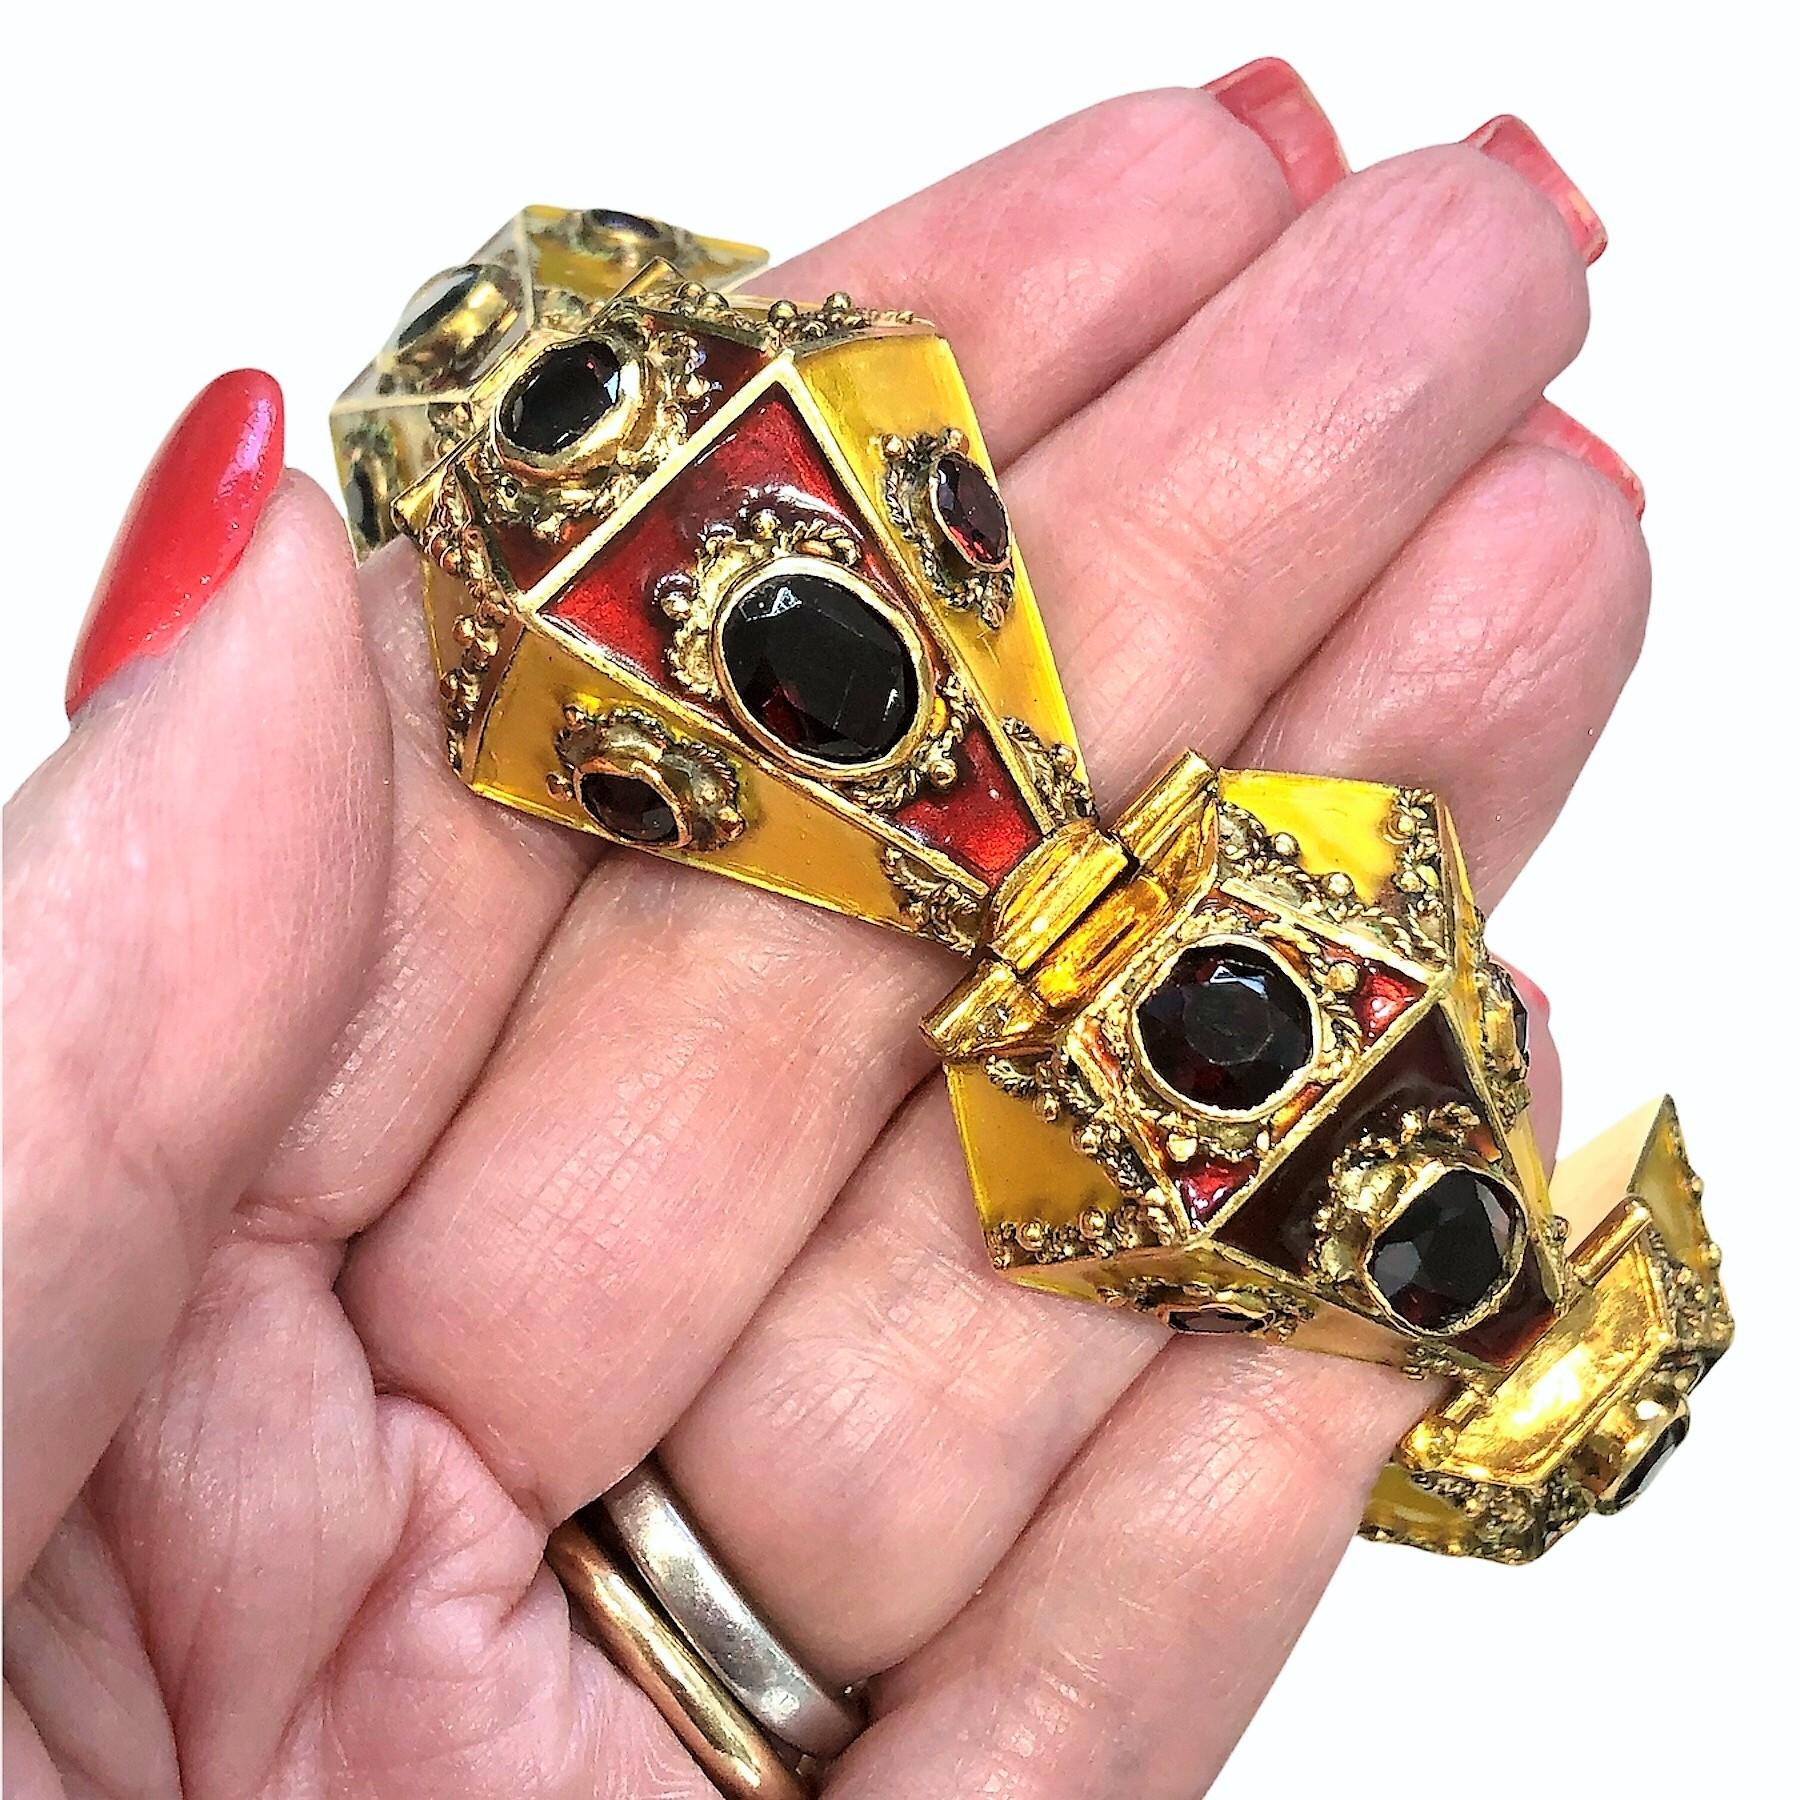 Rare and Beautiful Italian, 18k, Enamel and Garnet Etruscan Revival Bracelet In Good Condition For Sale In Palm Beach, FL